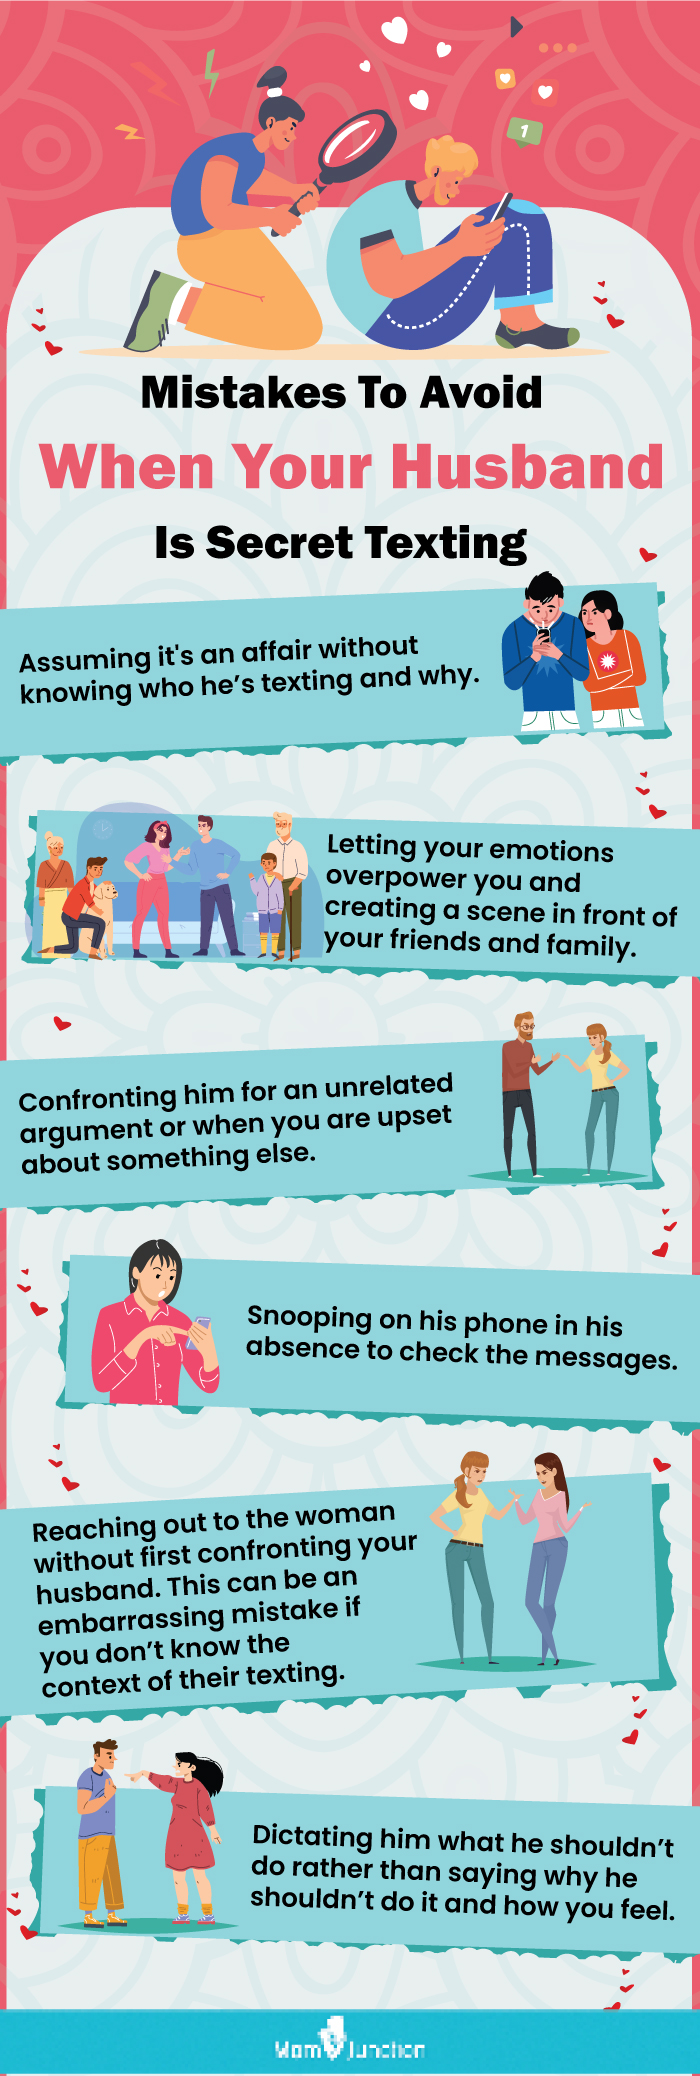 8 Signs Your Man Is Texting Another Woman and What To Do